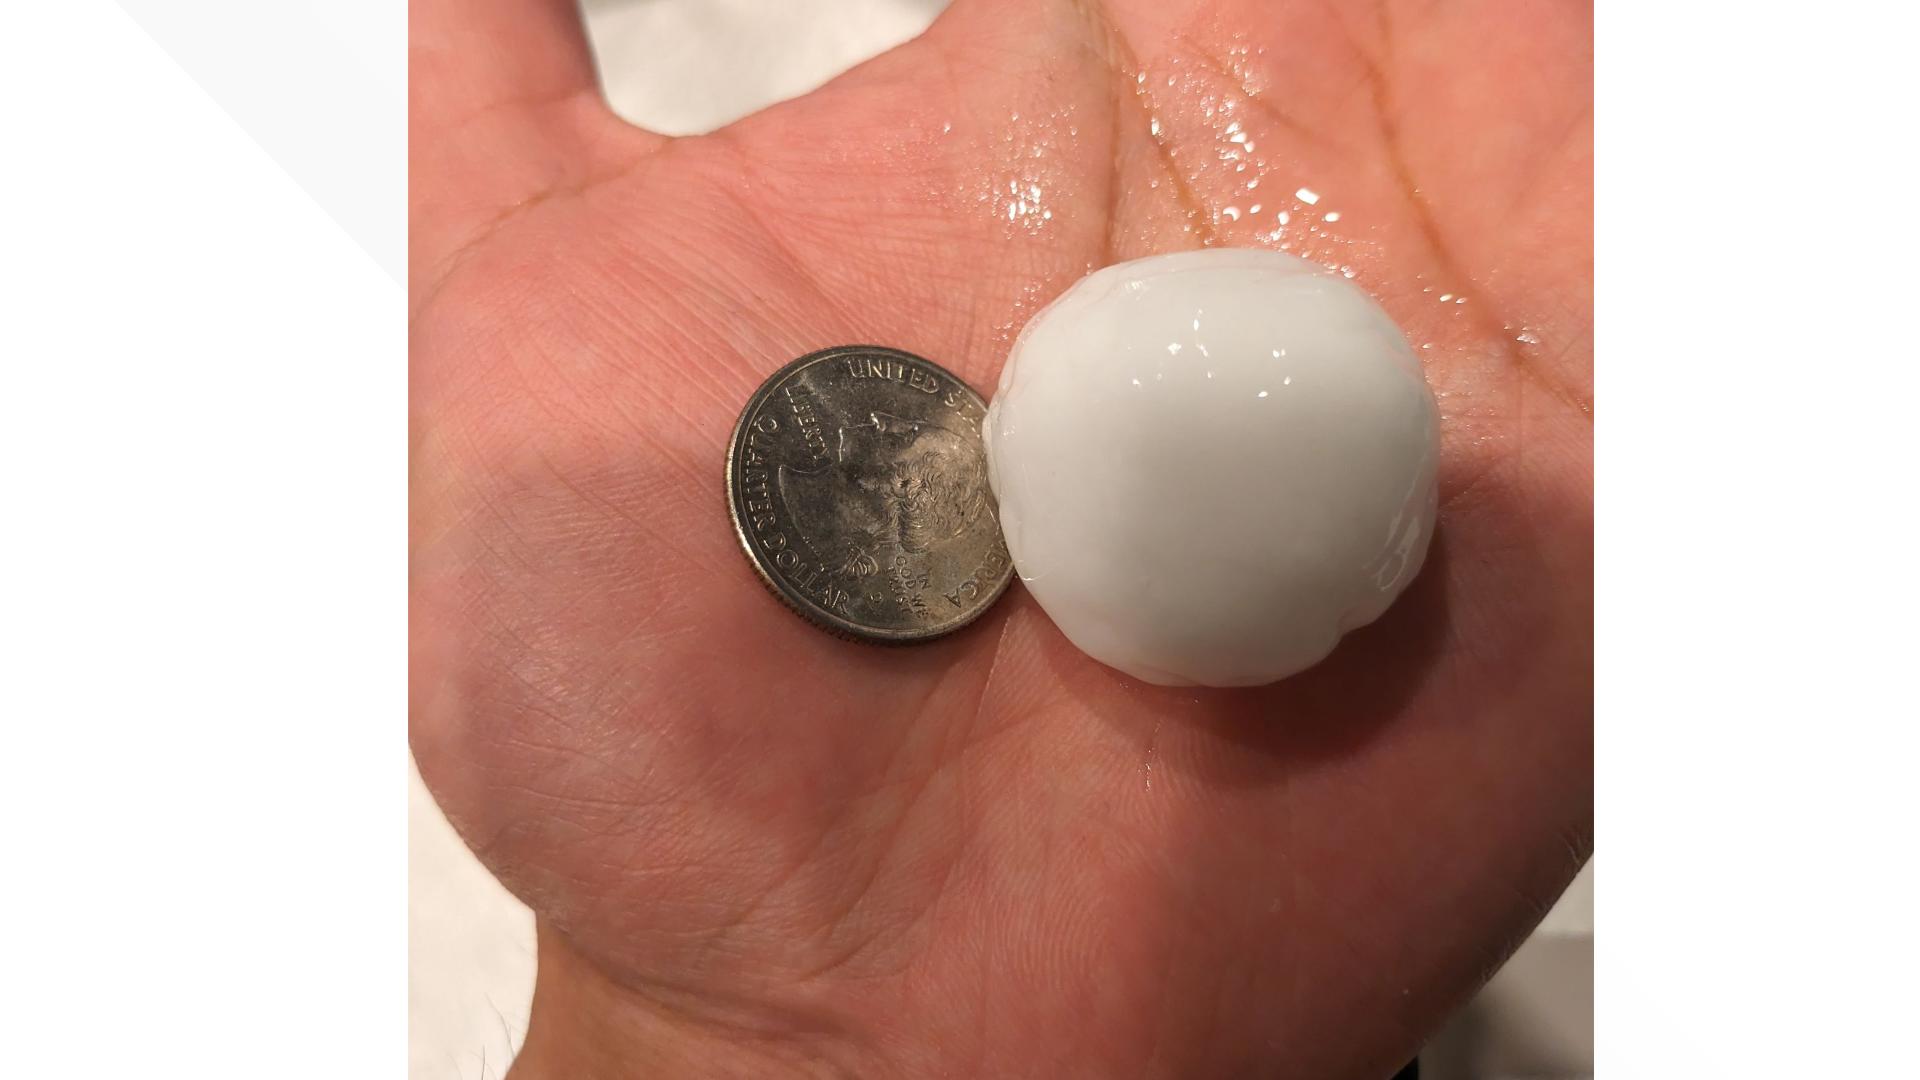 Colorado saw a hail of a storm Thursday night, rocking the north metro area.